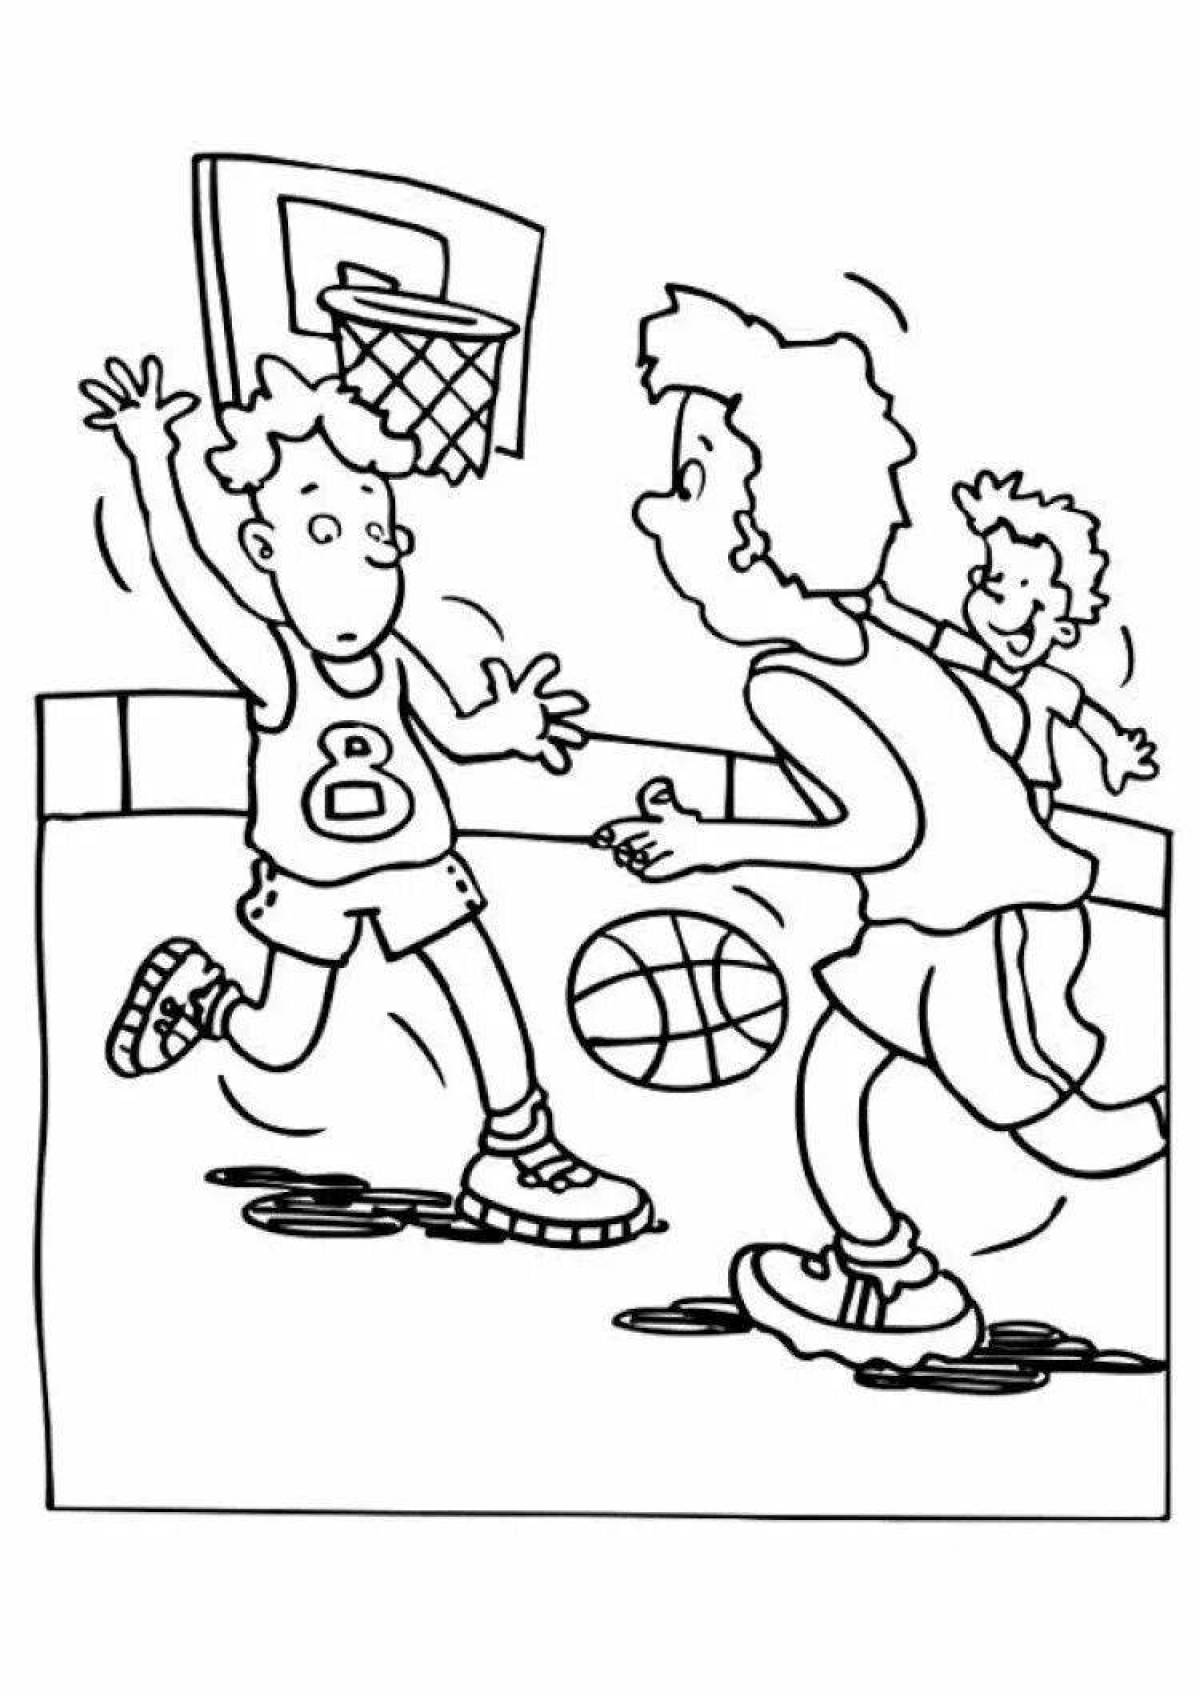 Color glowing sports game coloring page